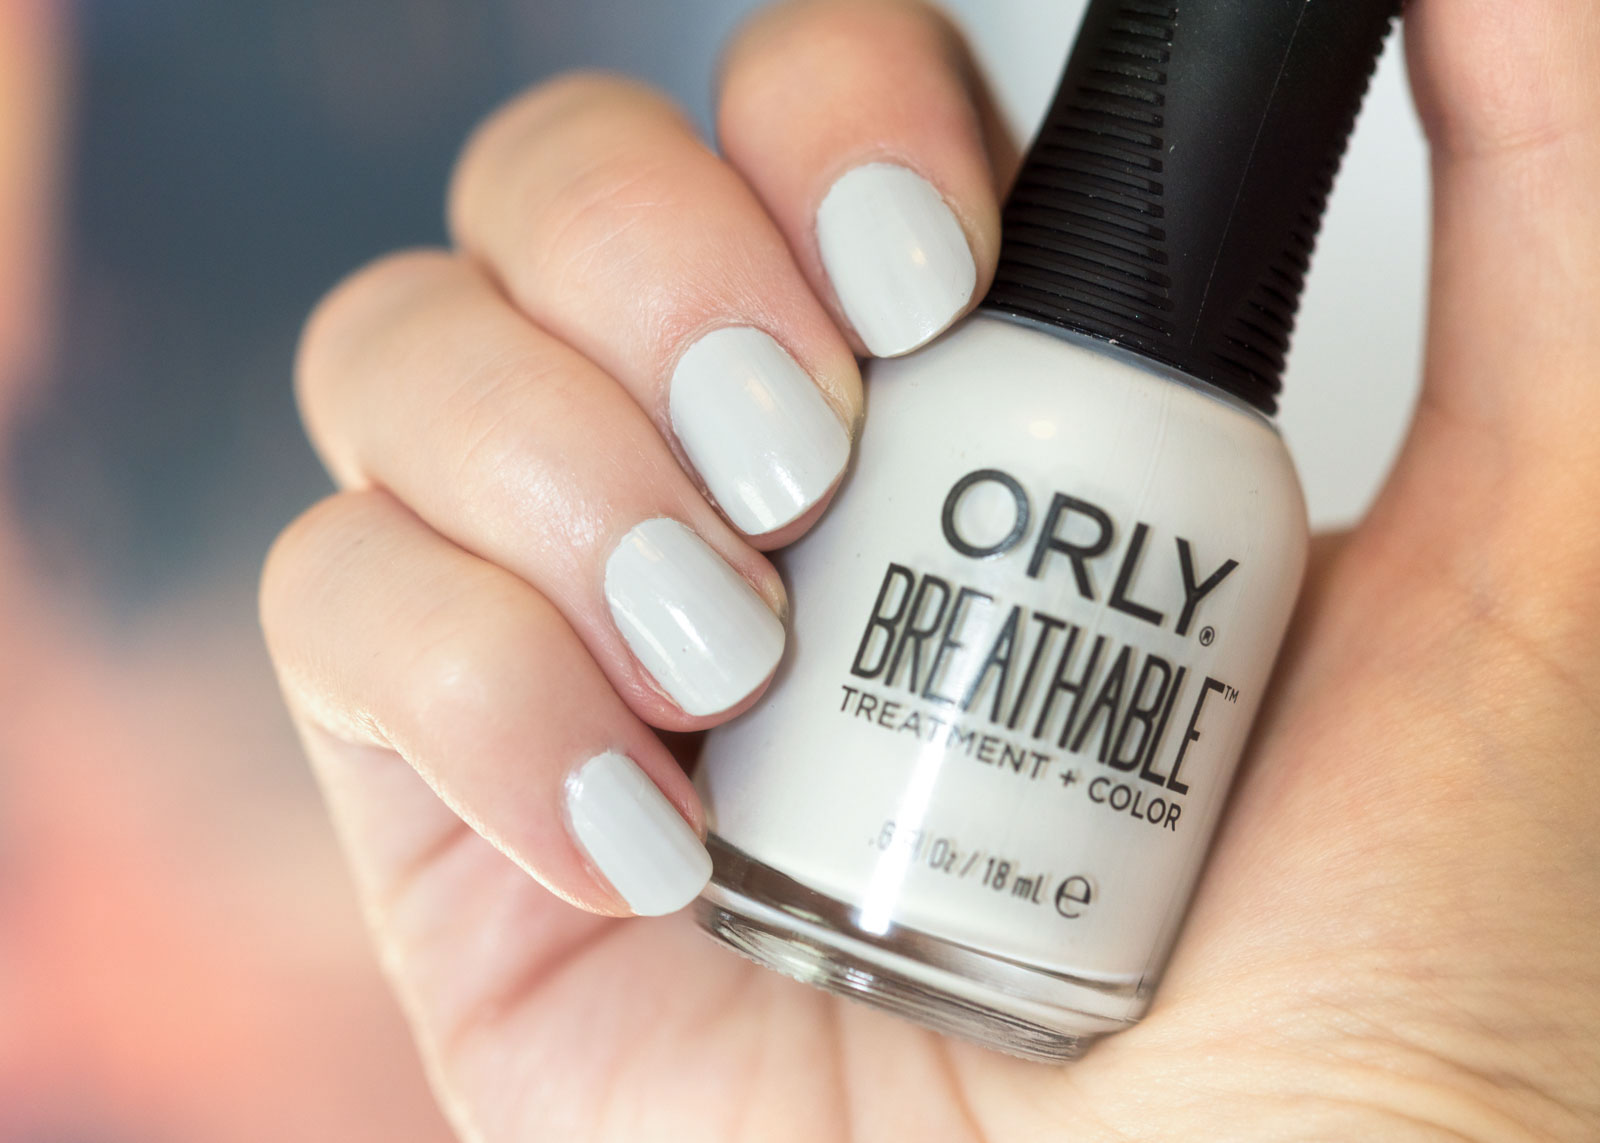 6. Orly Breathable Treatment + Color in "Peachy Parfait" - wide 10